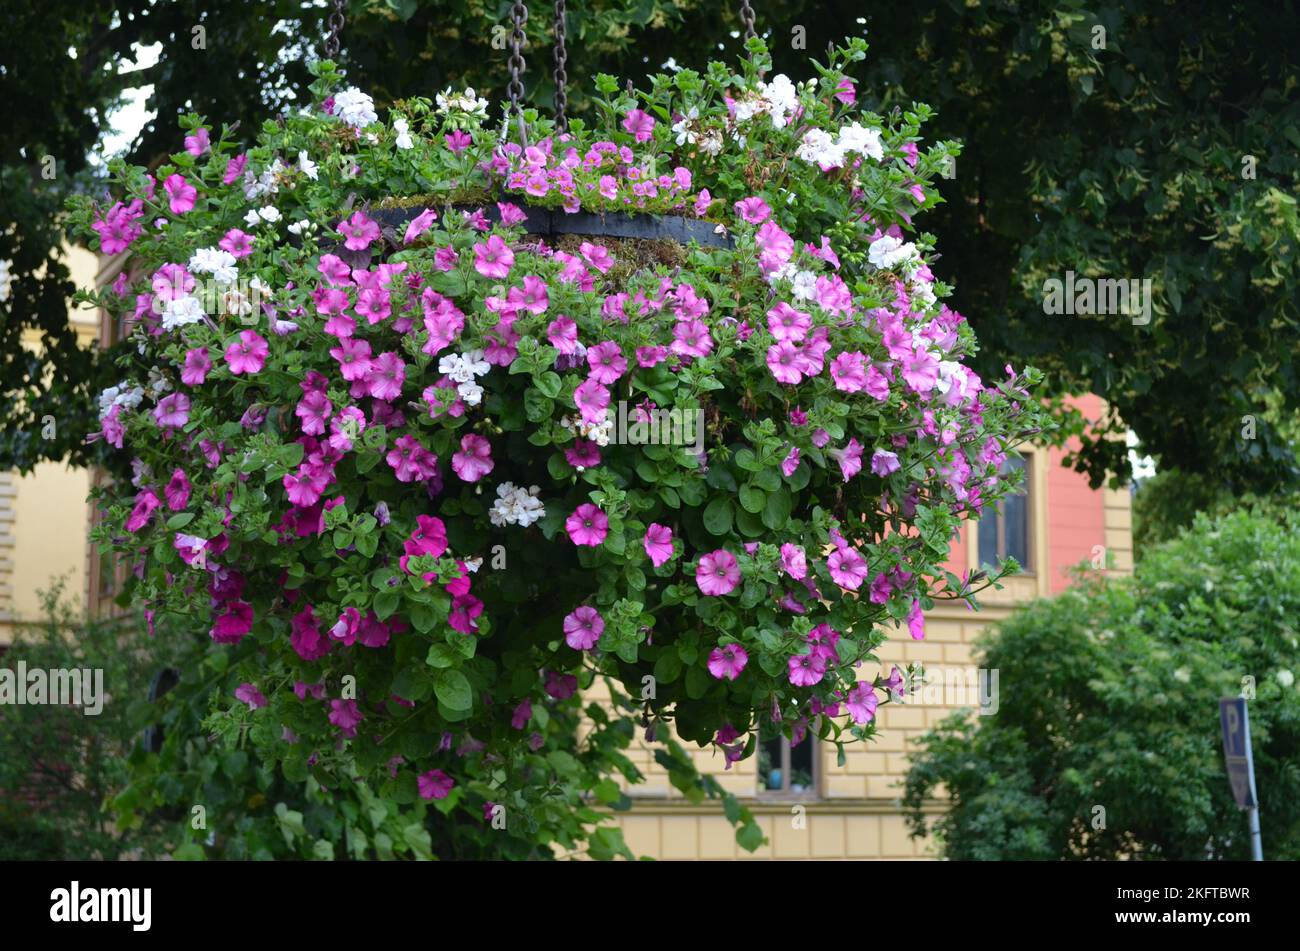 Large group of Petunia axillaris light white and pink flowers in a pot, with blurred background in a garden in a sunny spring day Stock Photo